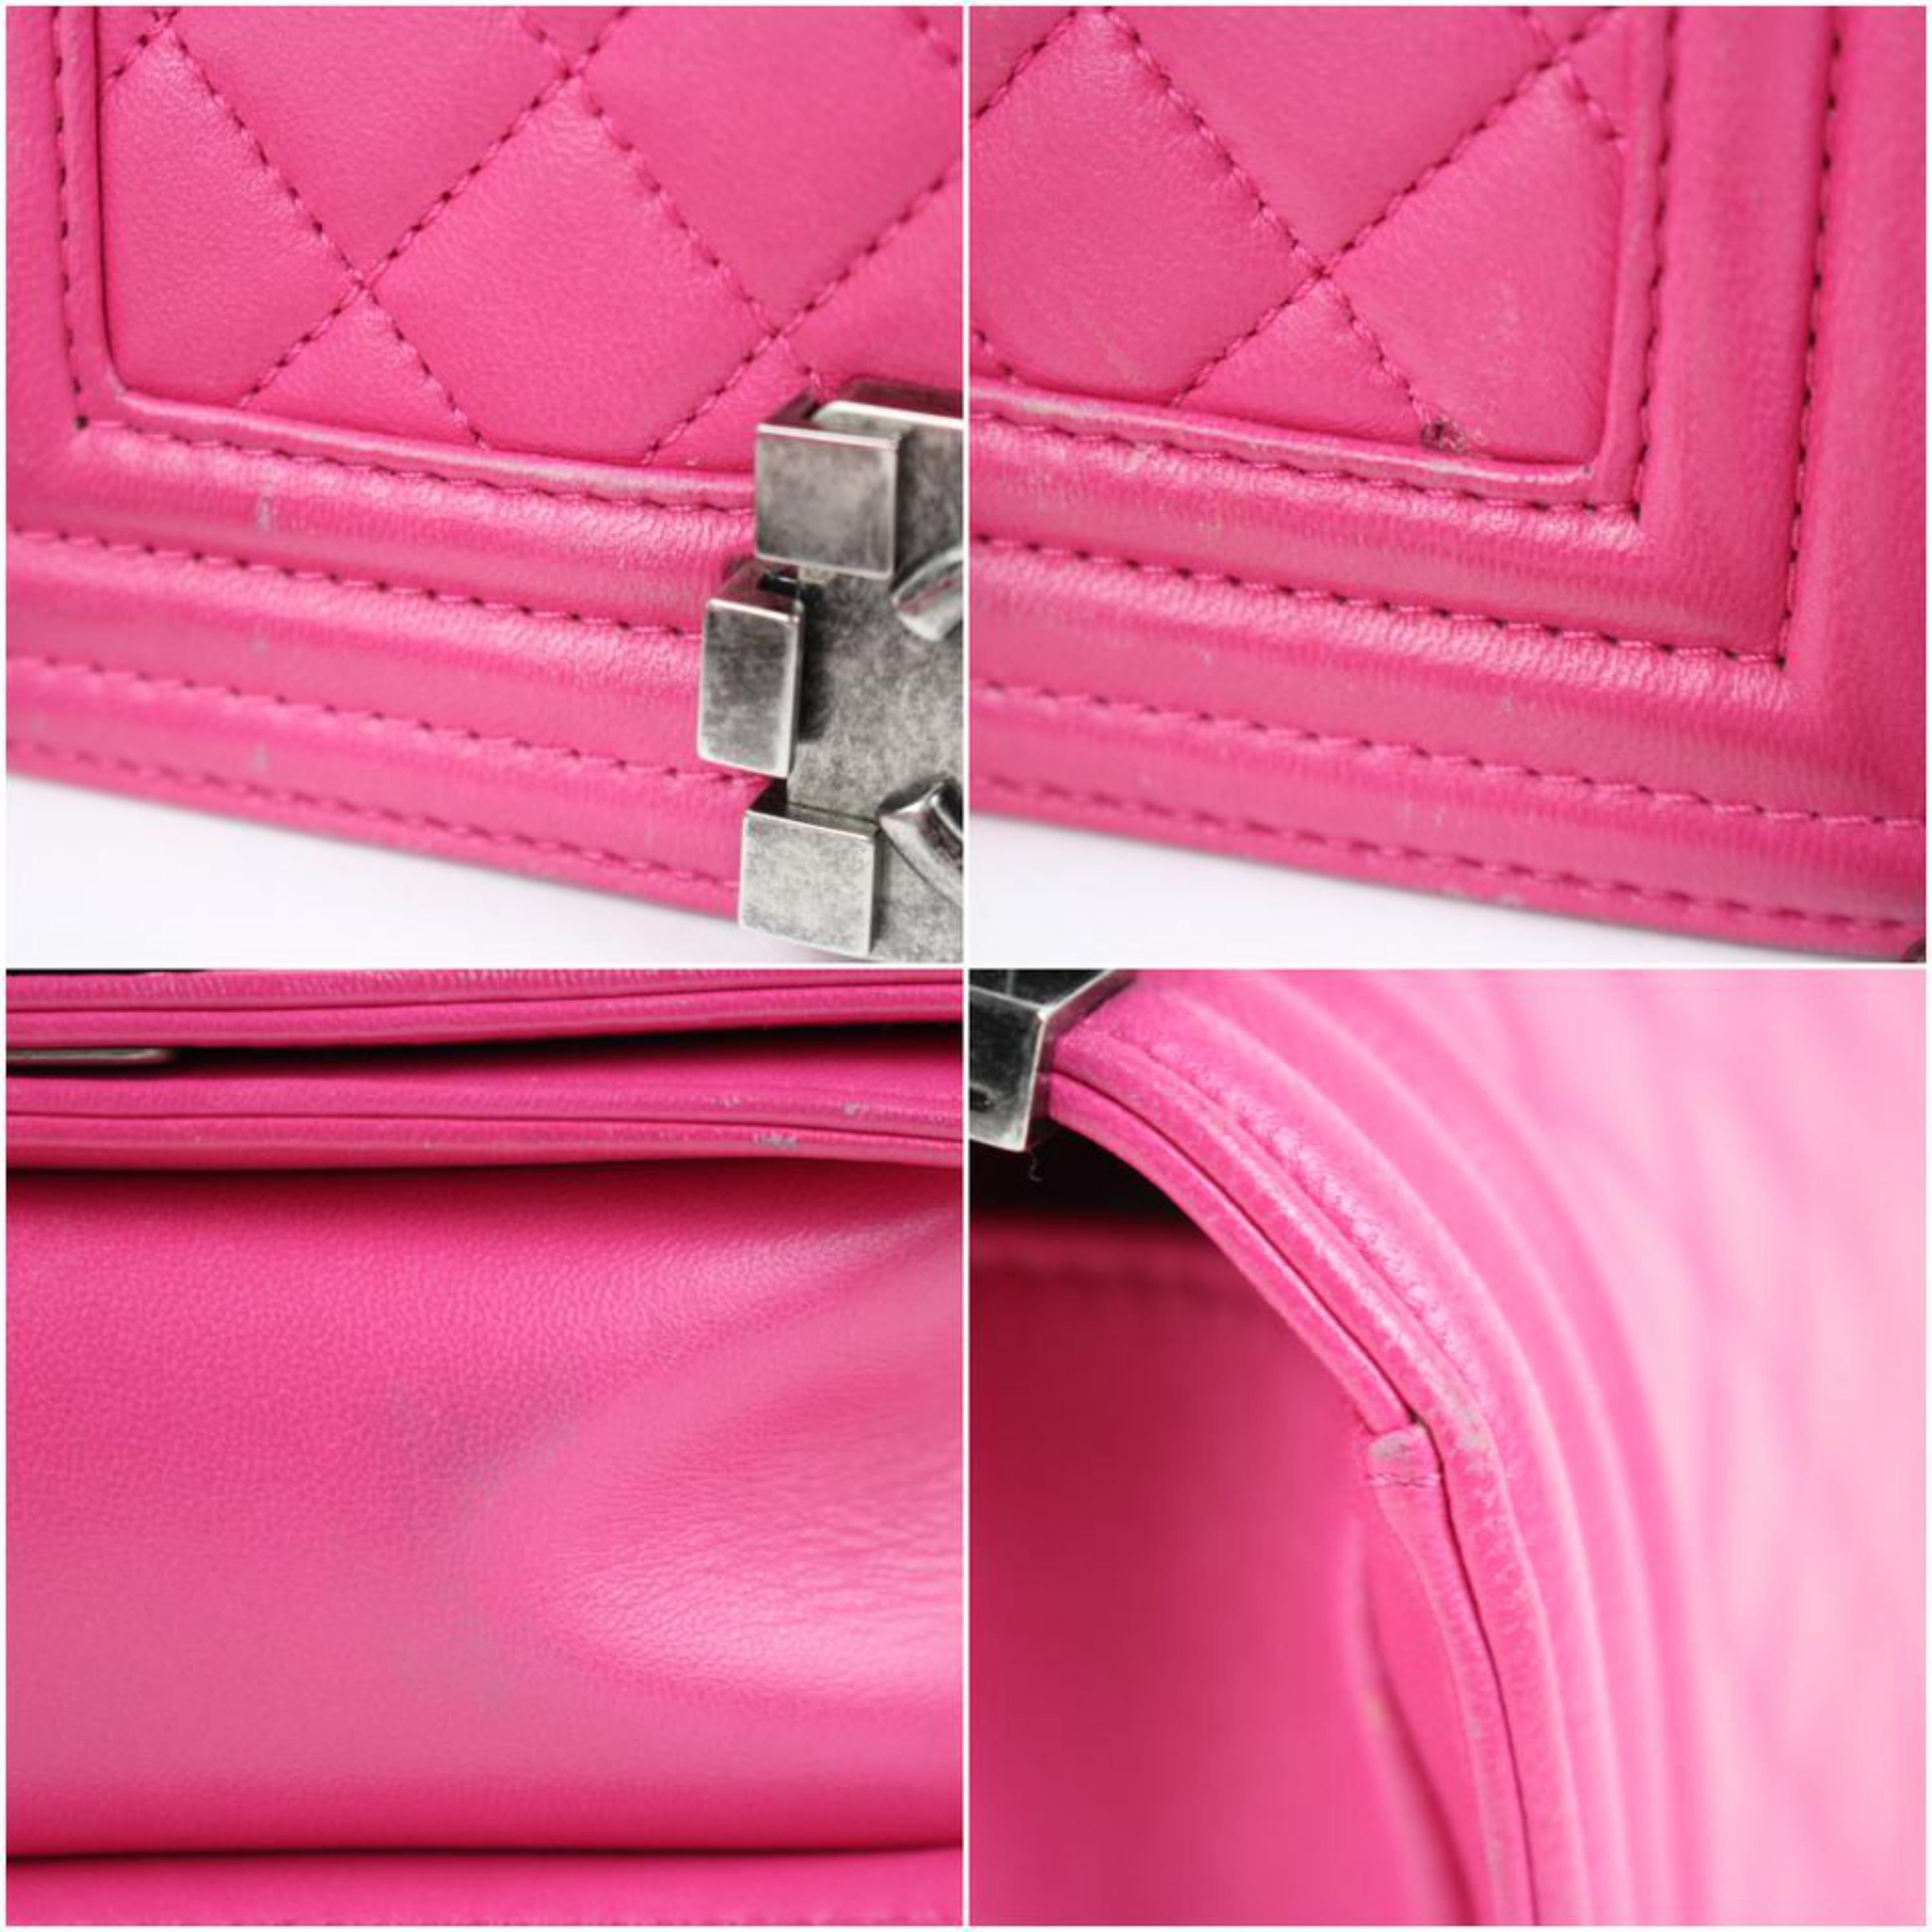 Chanel Boy Small Lambskin Le 9617ct13 Hot Pink Leather Shoulder Bag For Sale 5